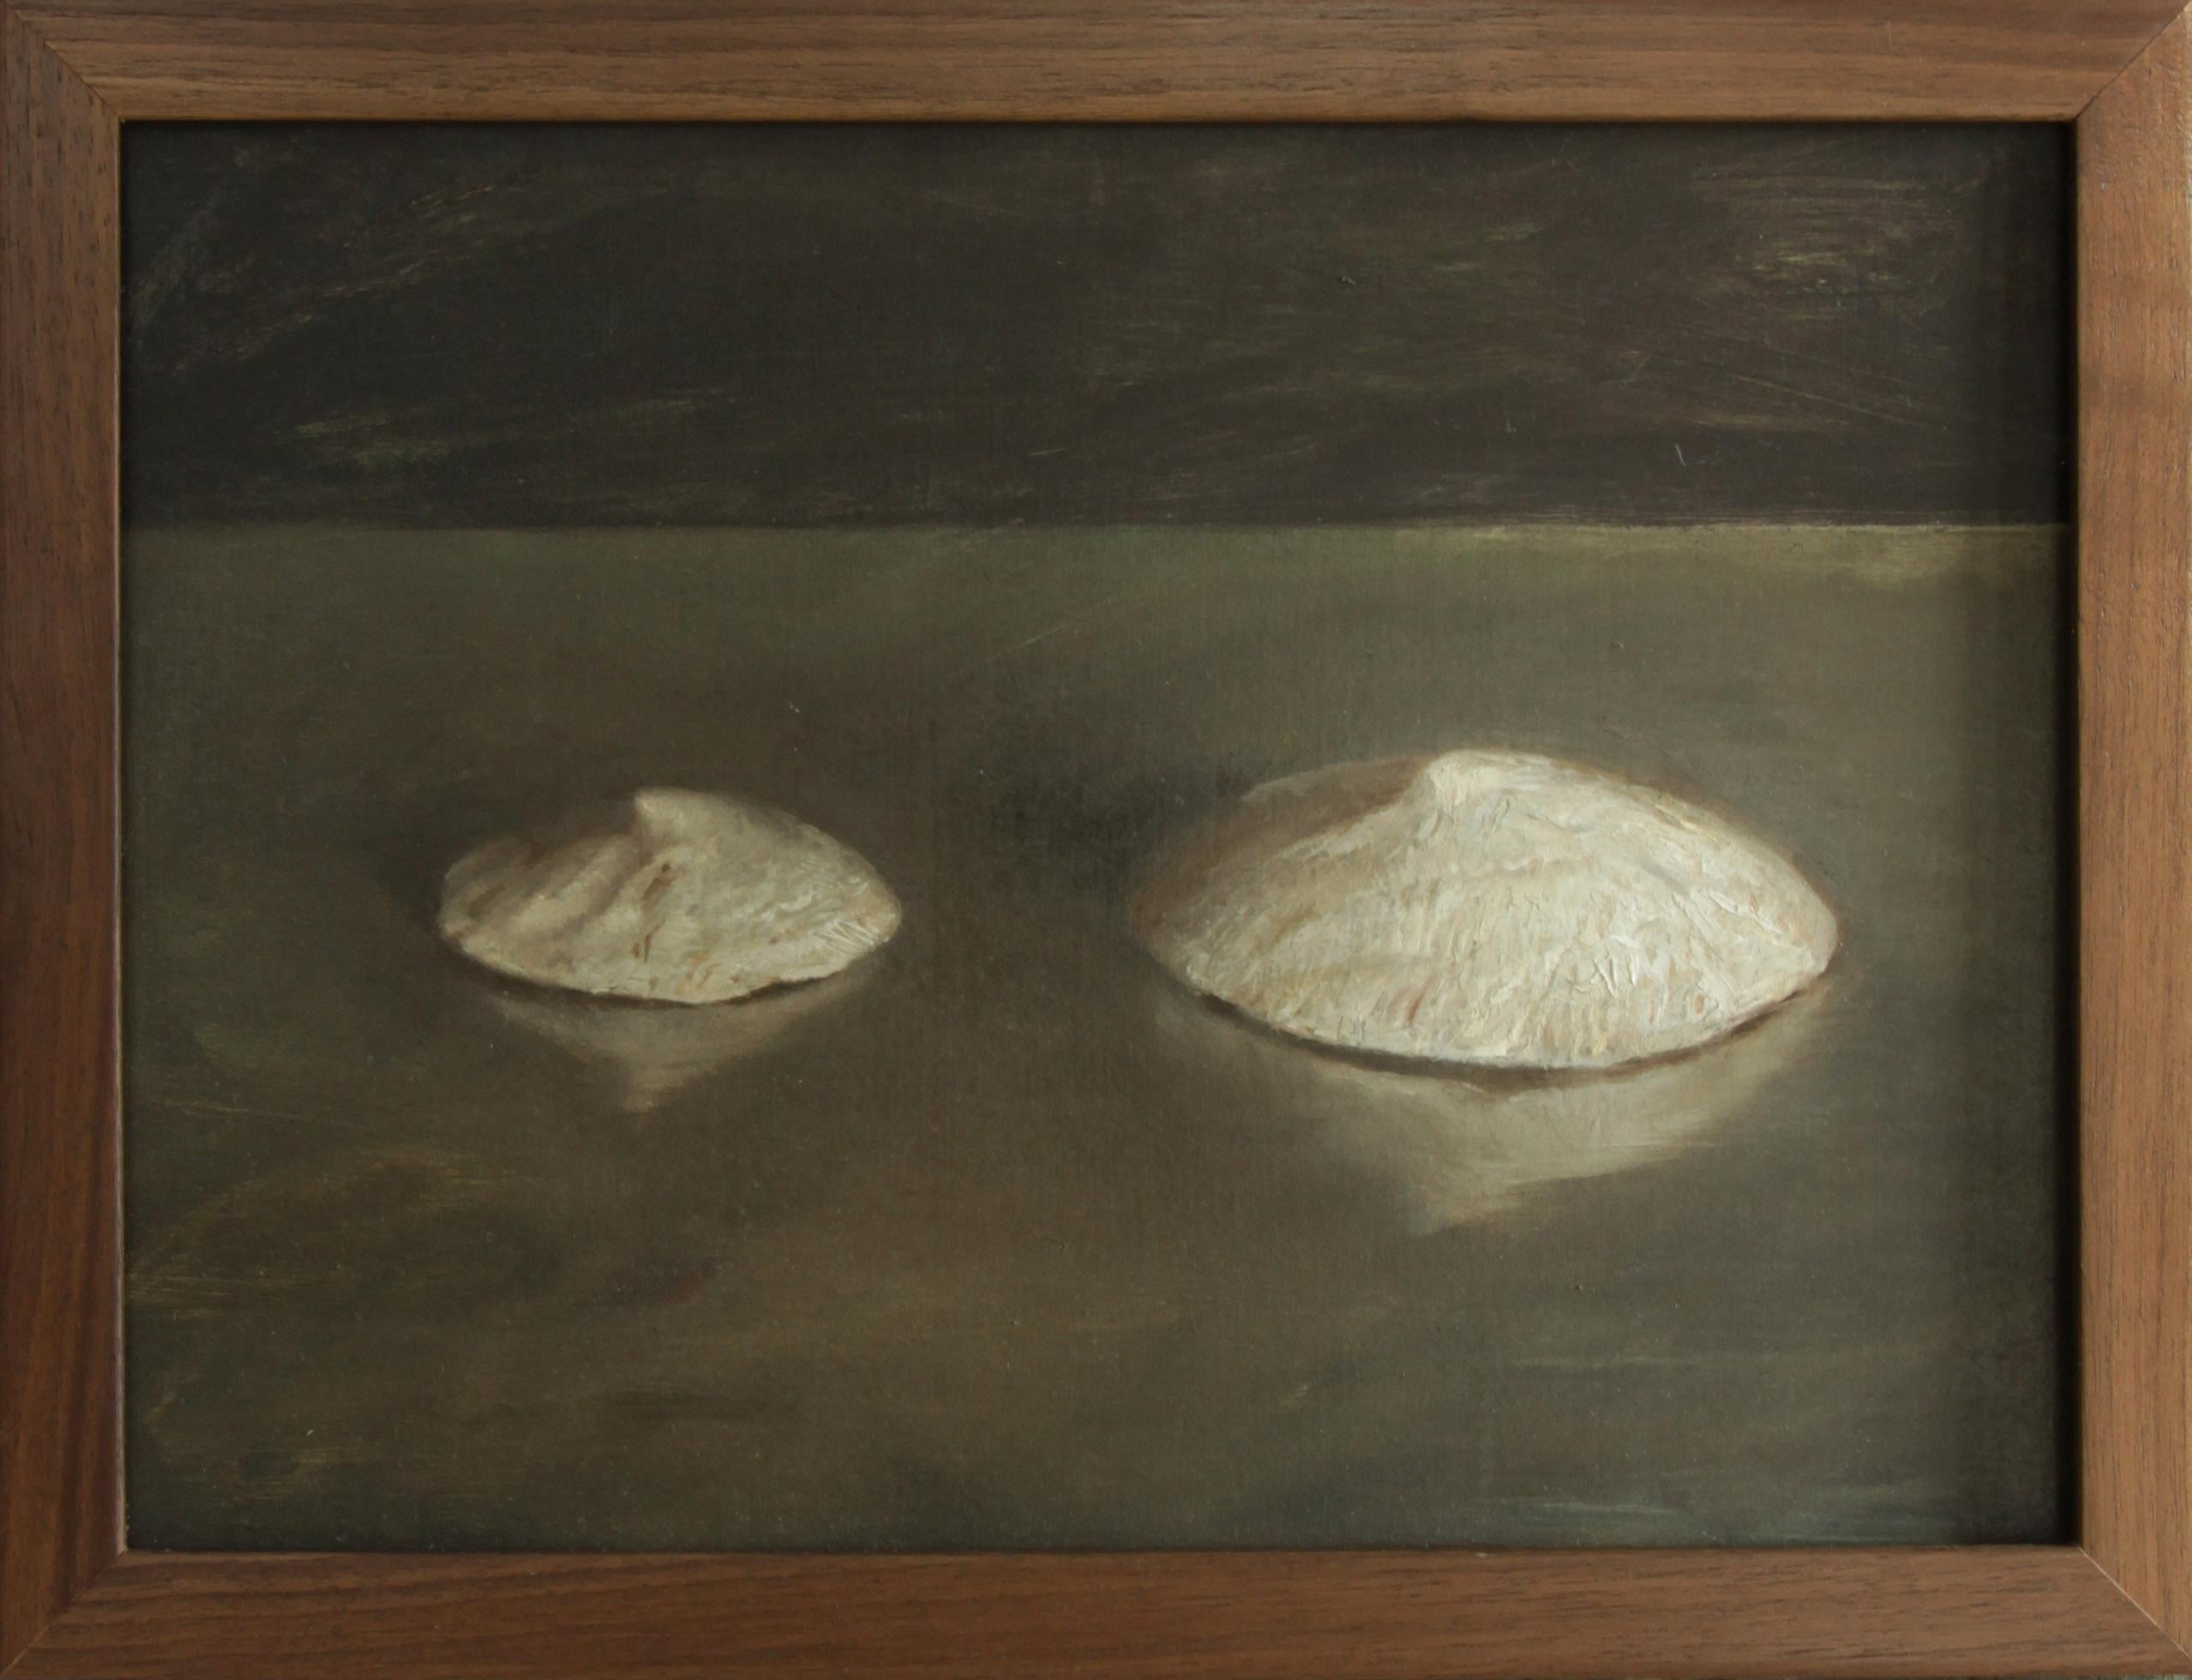 Sea Snail Fossils - Sea Shell Still Life on Two Toned Olive Colored Background - Painting by Helen Oh